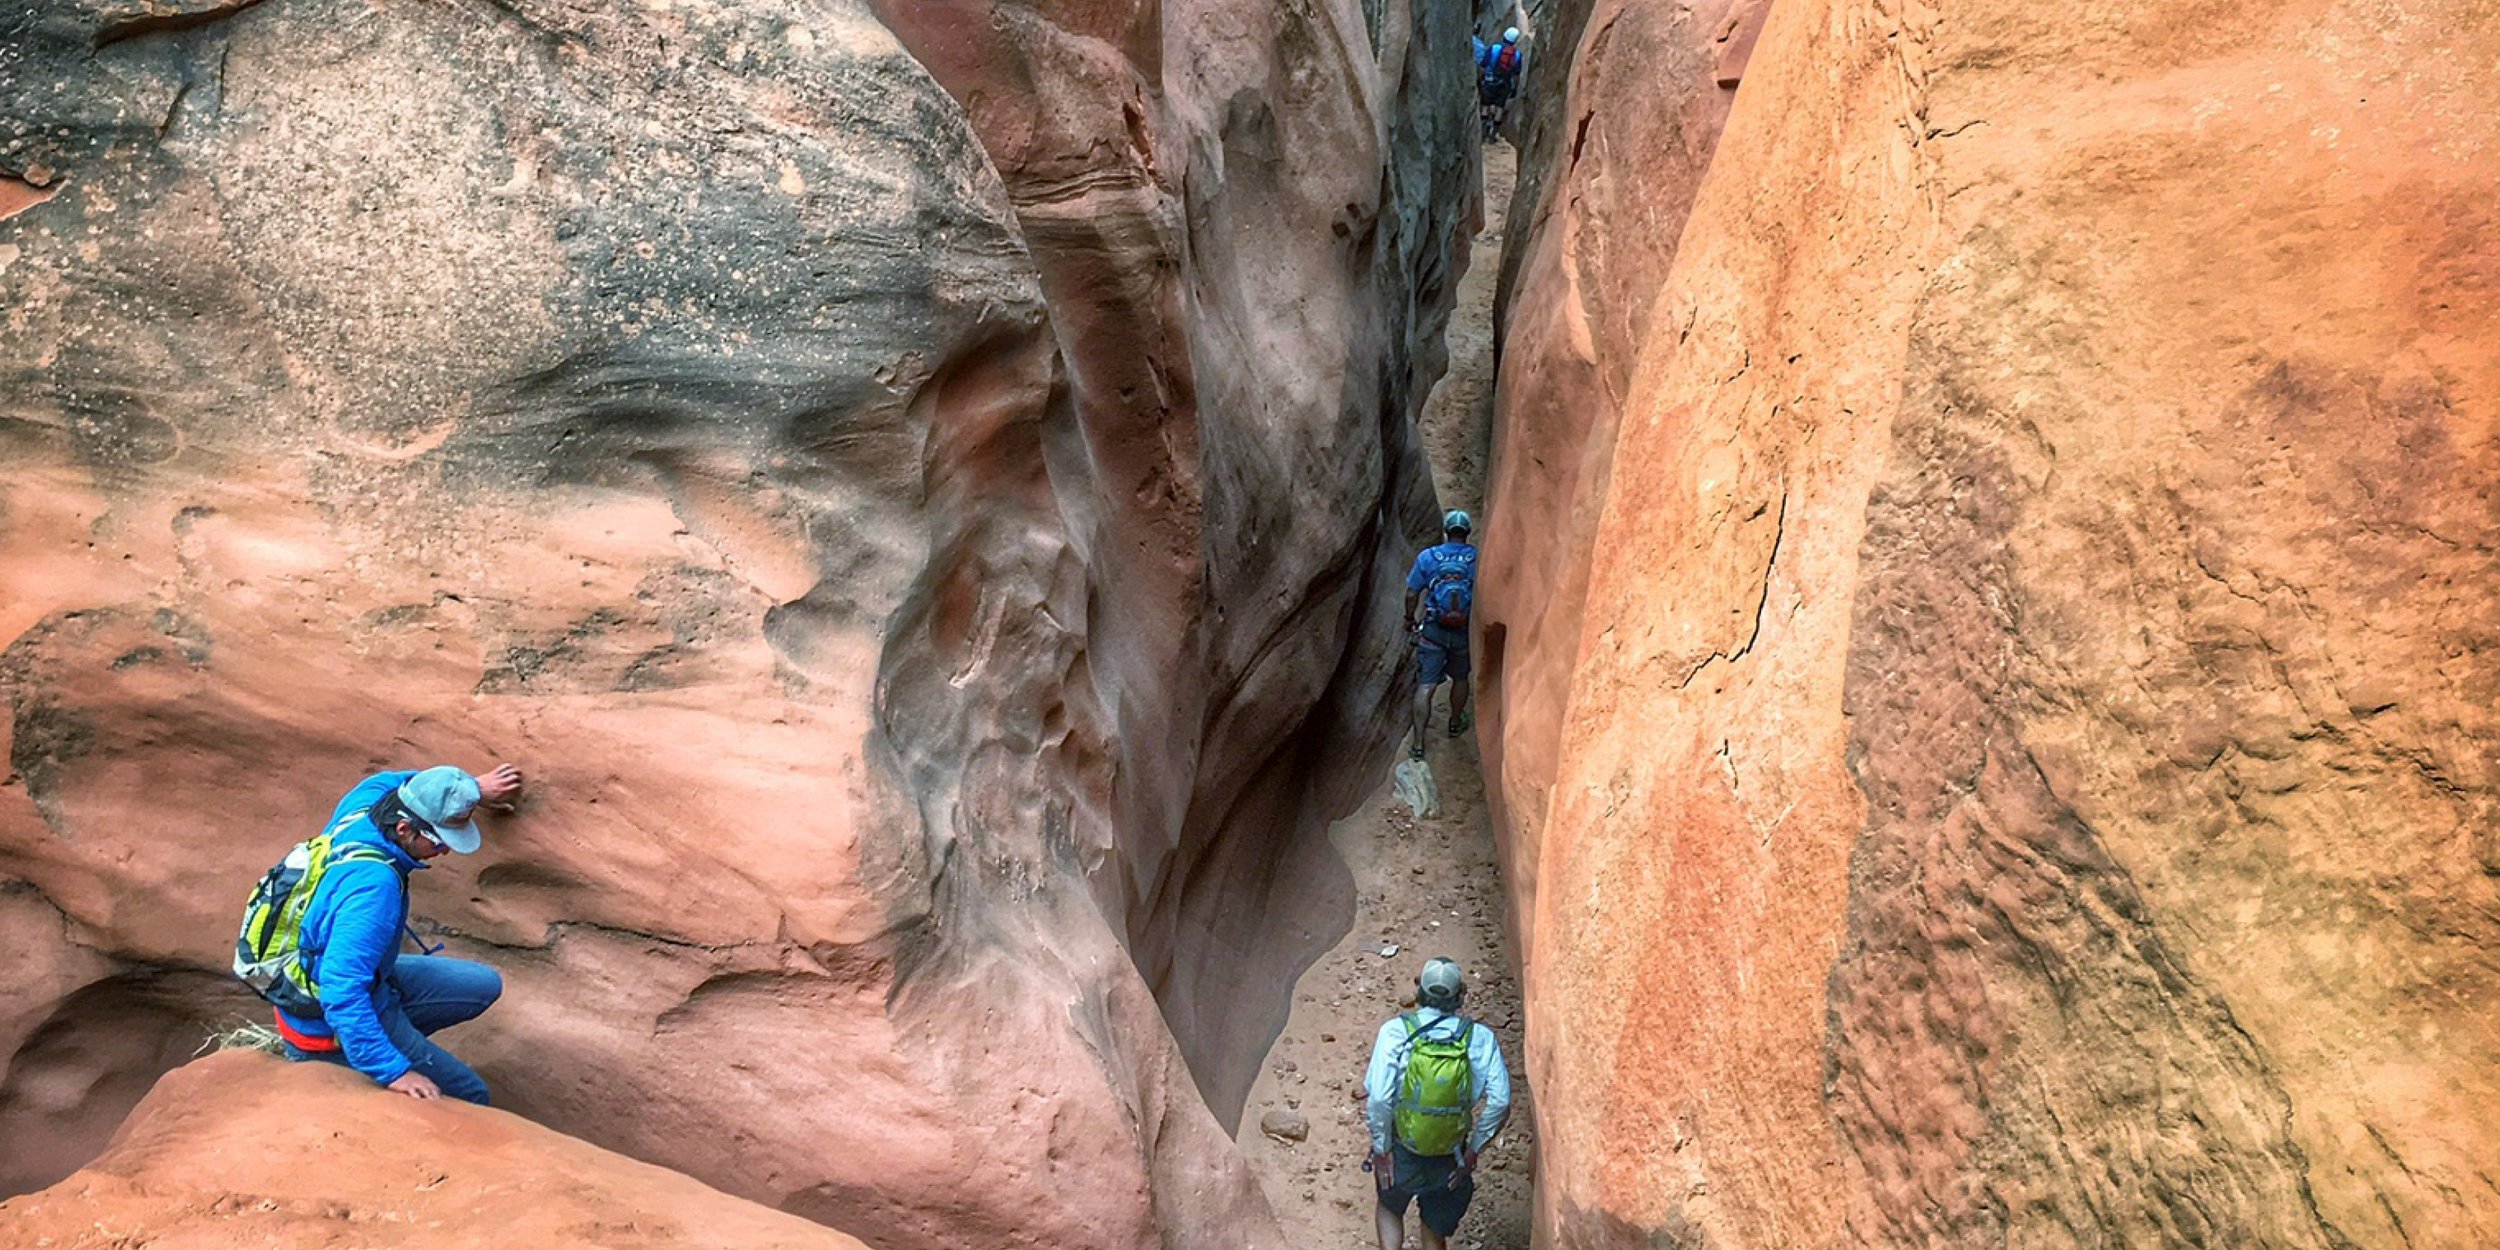 Slot Canyons with hiking packs and hiking gear